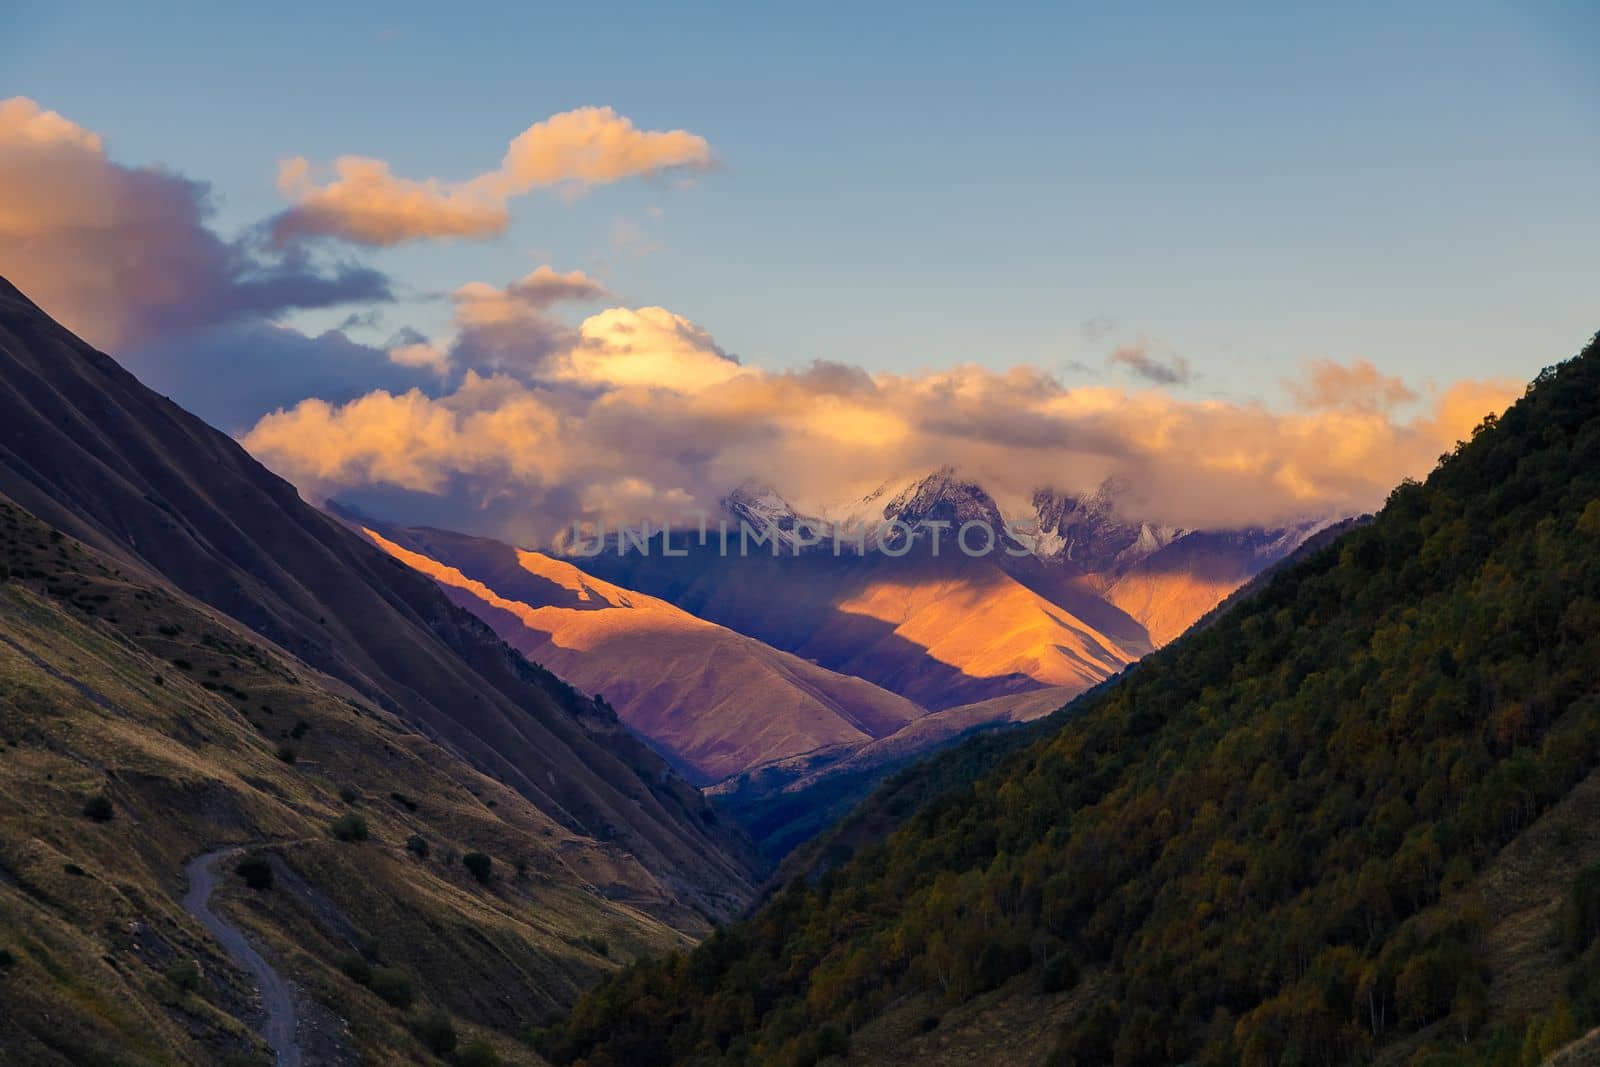 Highlands of North Ossetia. Mountains of the Caucasus. High mountains in the rays of the setting sun. by Yurich32